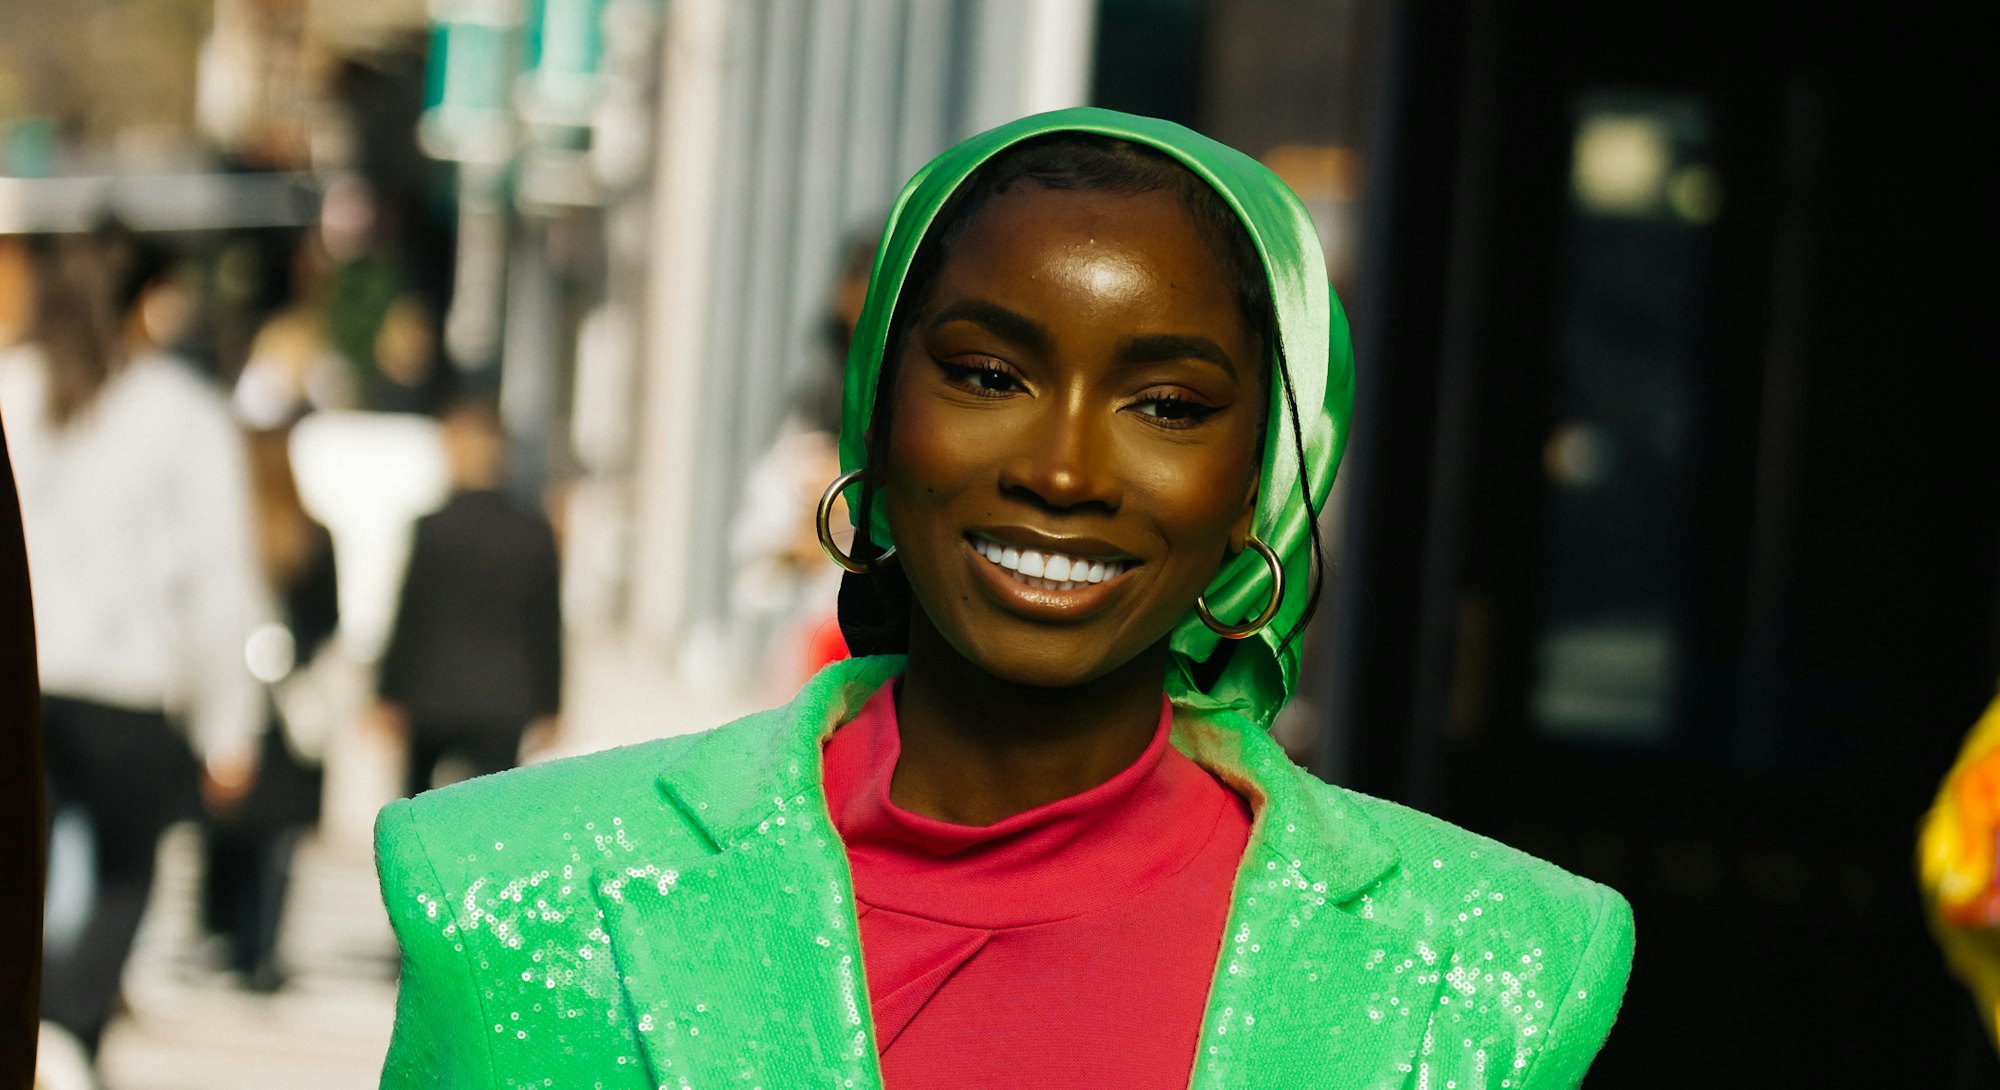 NYFW street style included neon suiting 